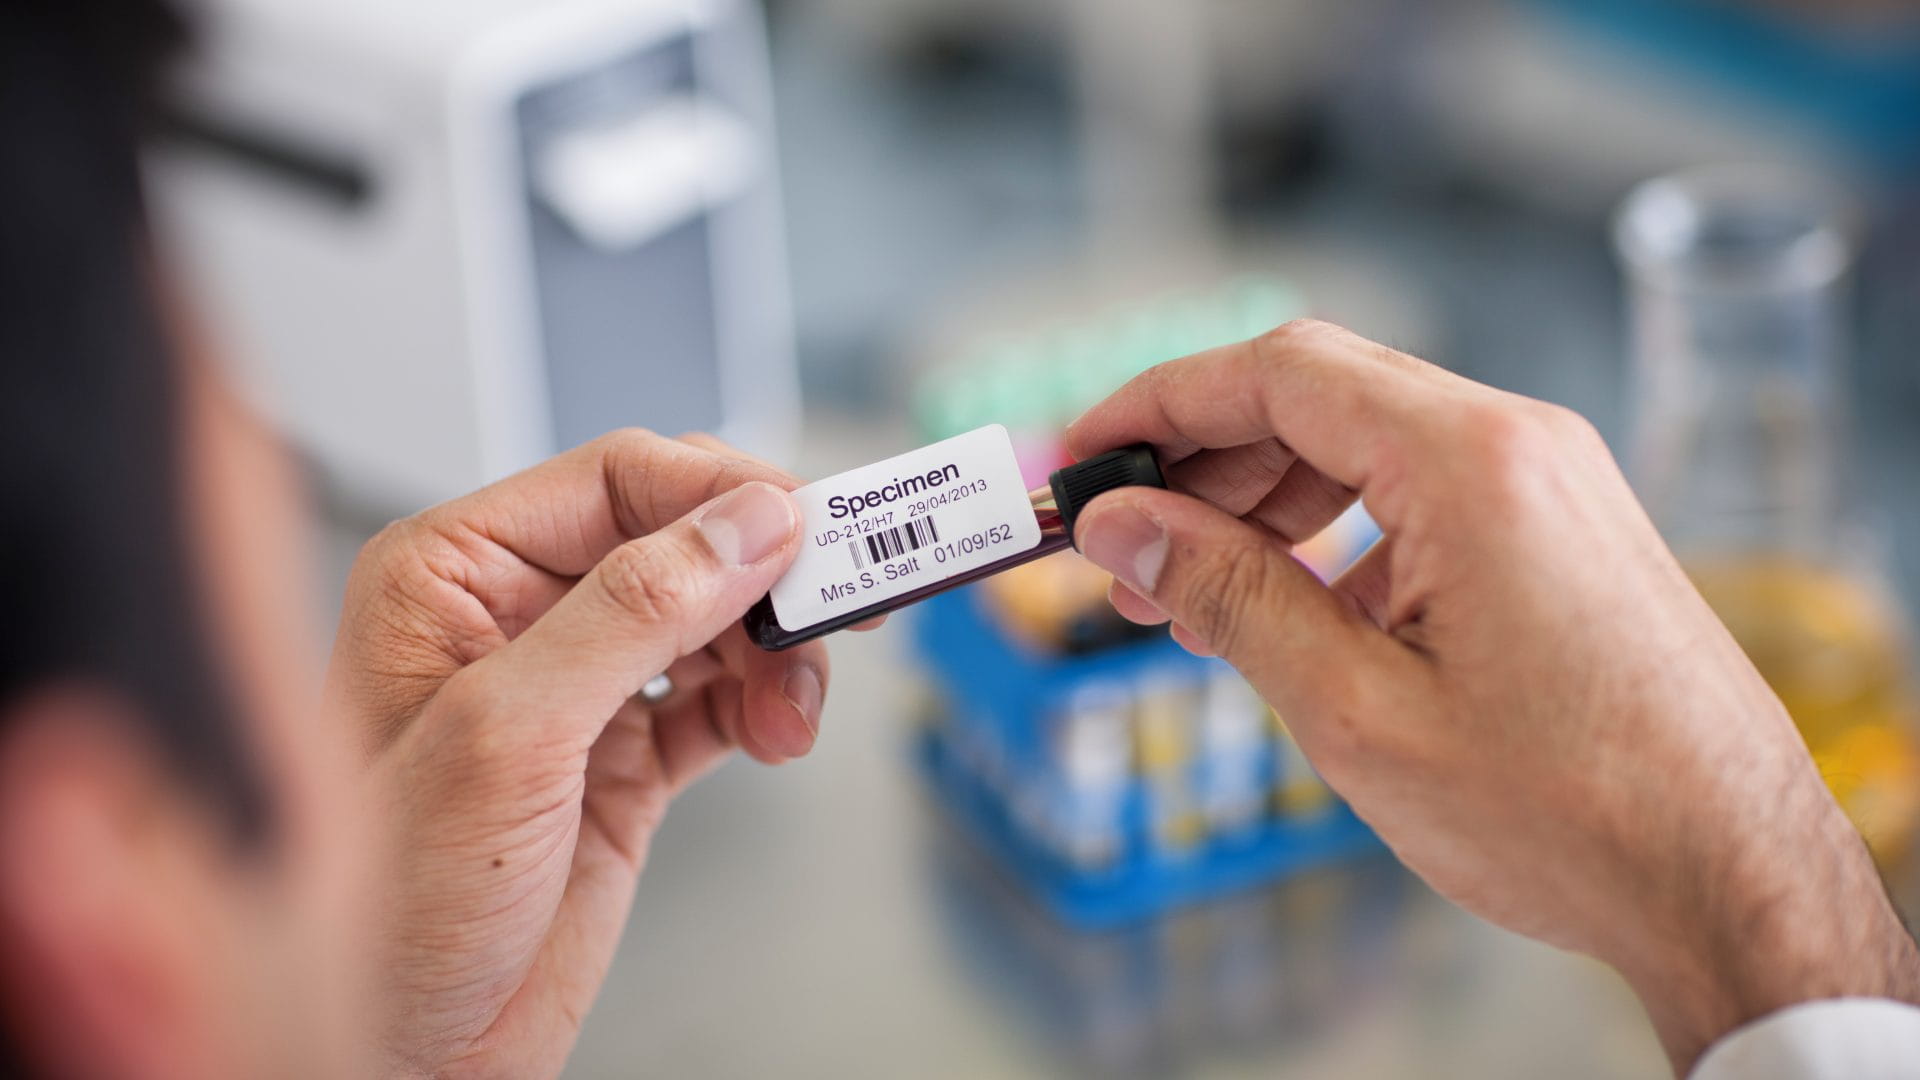 Chemical-resistant labels: How to use them at work and at home